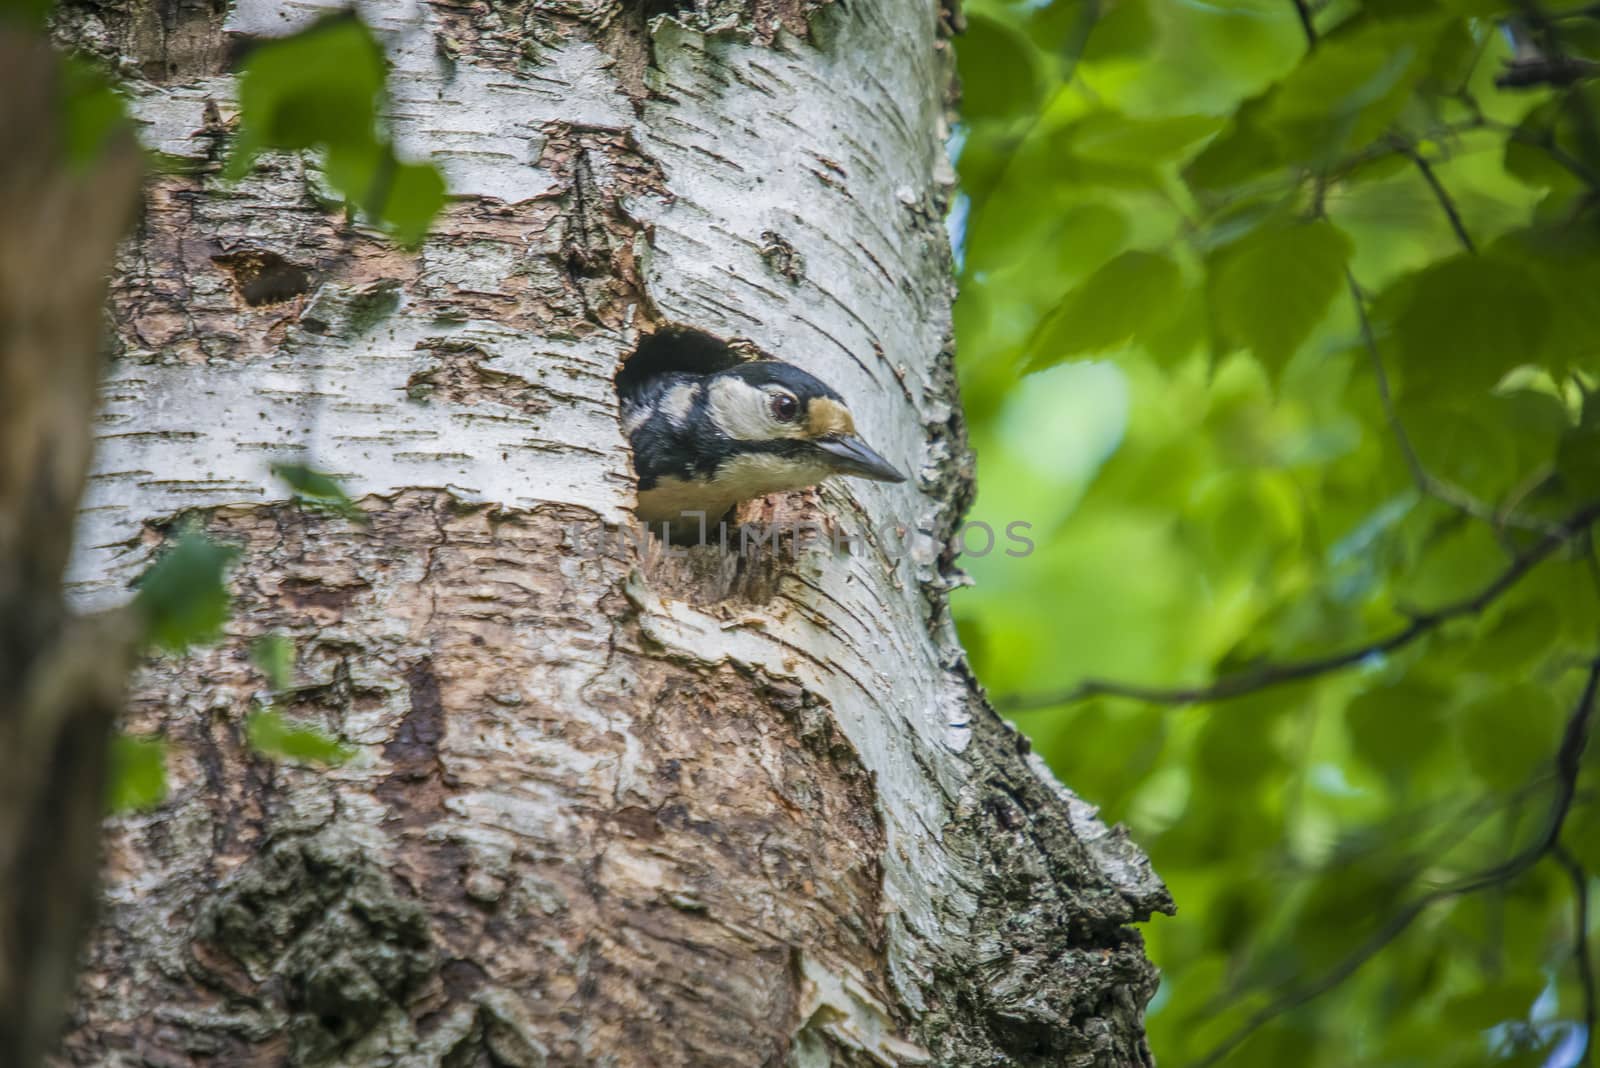 Great Spotted Woodpecker, Dendrocopos major looks out of the hole in the nest to see if it is ready to fly out. The image is shot at Roeds mountain in Halden, Norway.